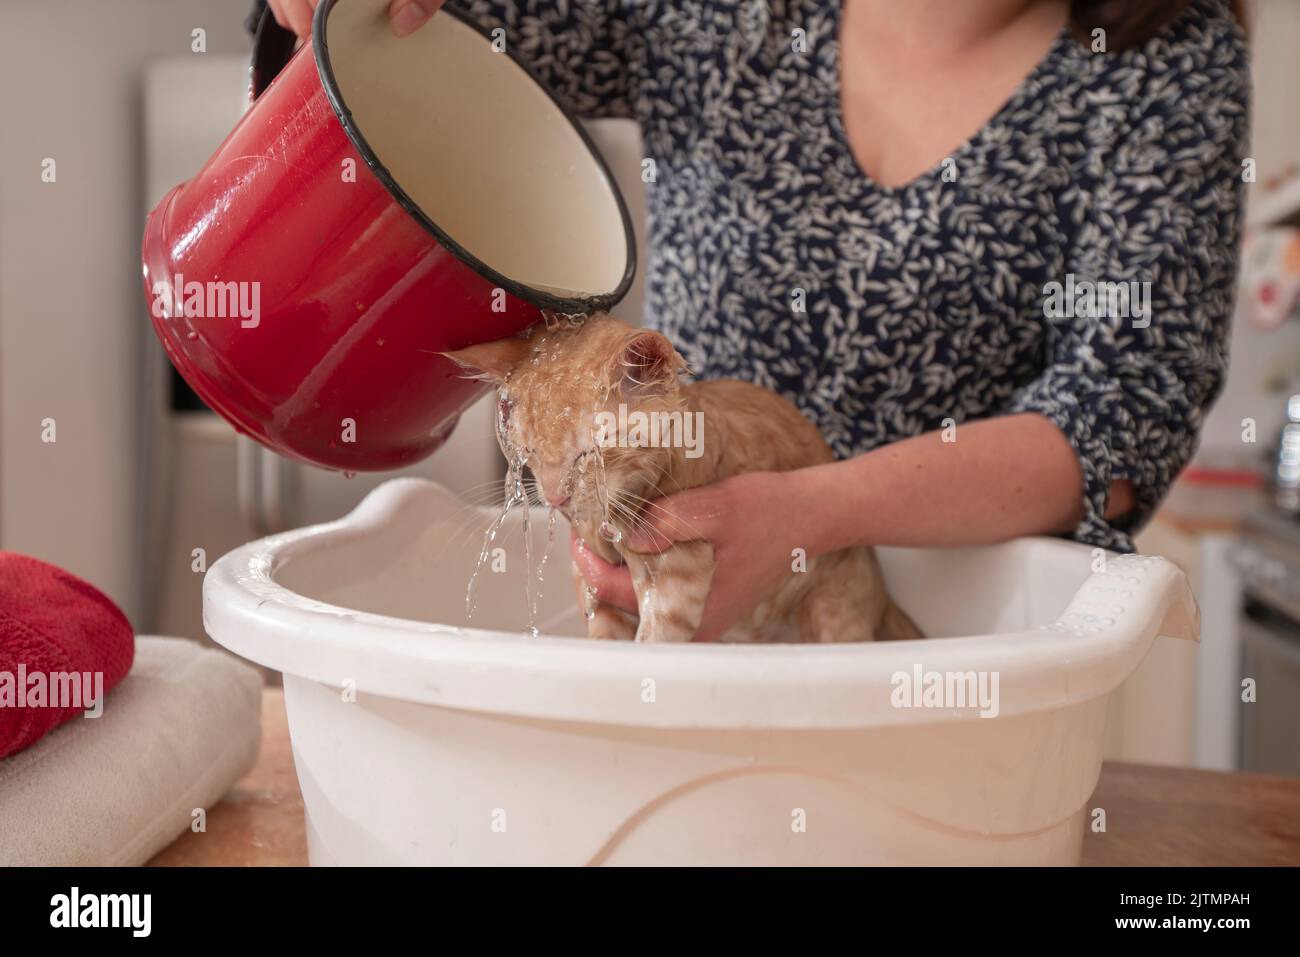 Close-up of a young woman bathing her little light brown baby kitten inside a white plastic face washer, her owner wets her with a red pot full of wat Stock Photo